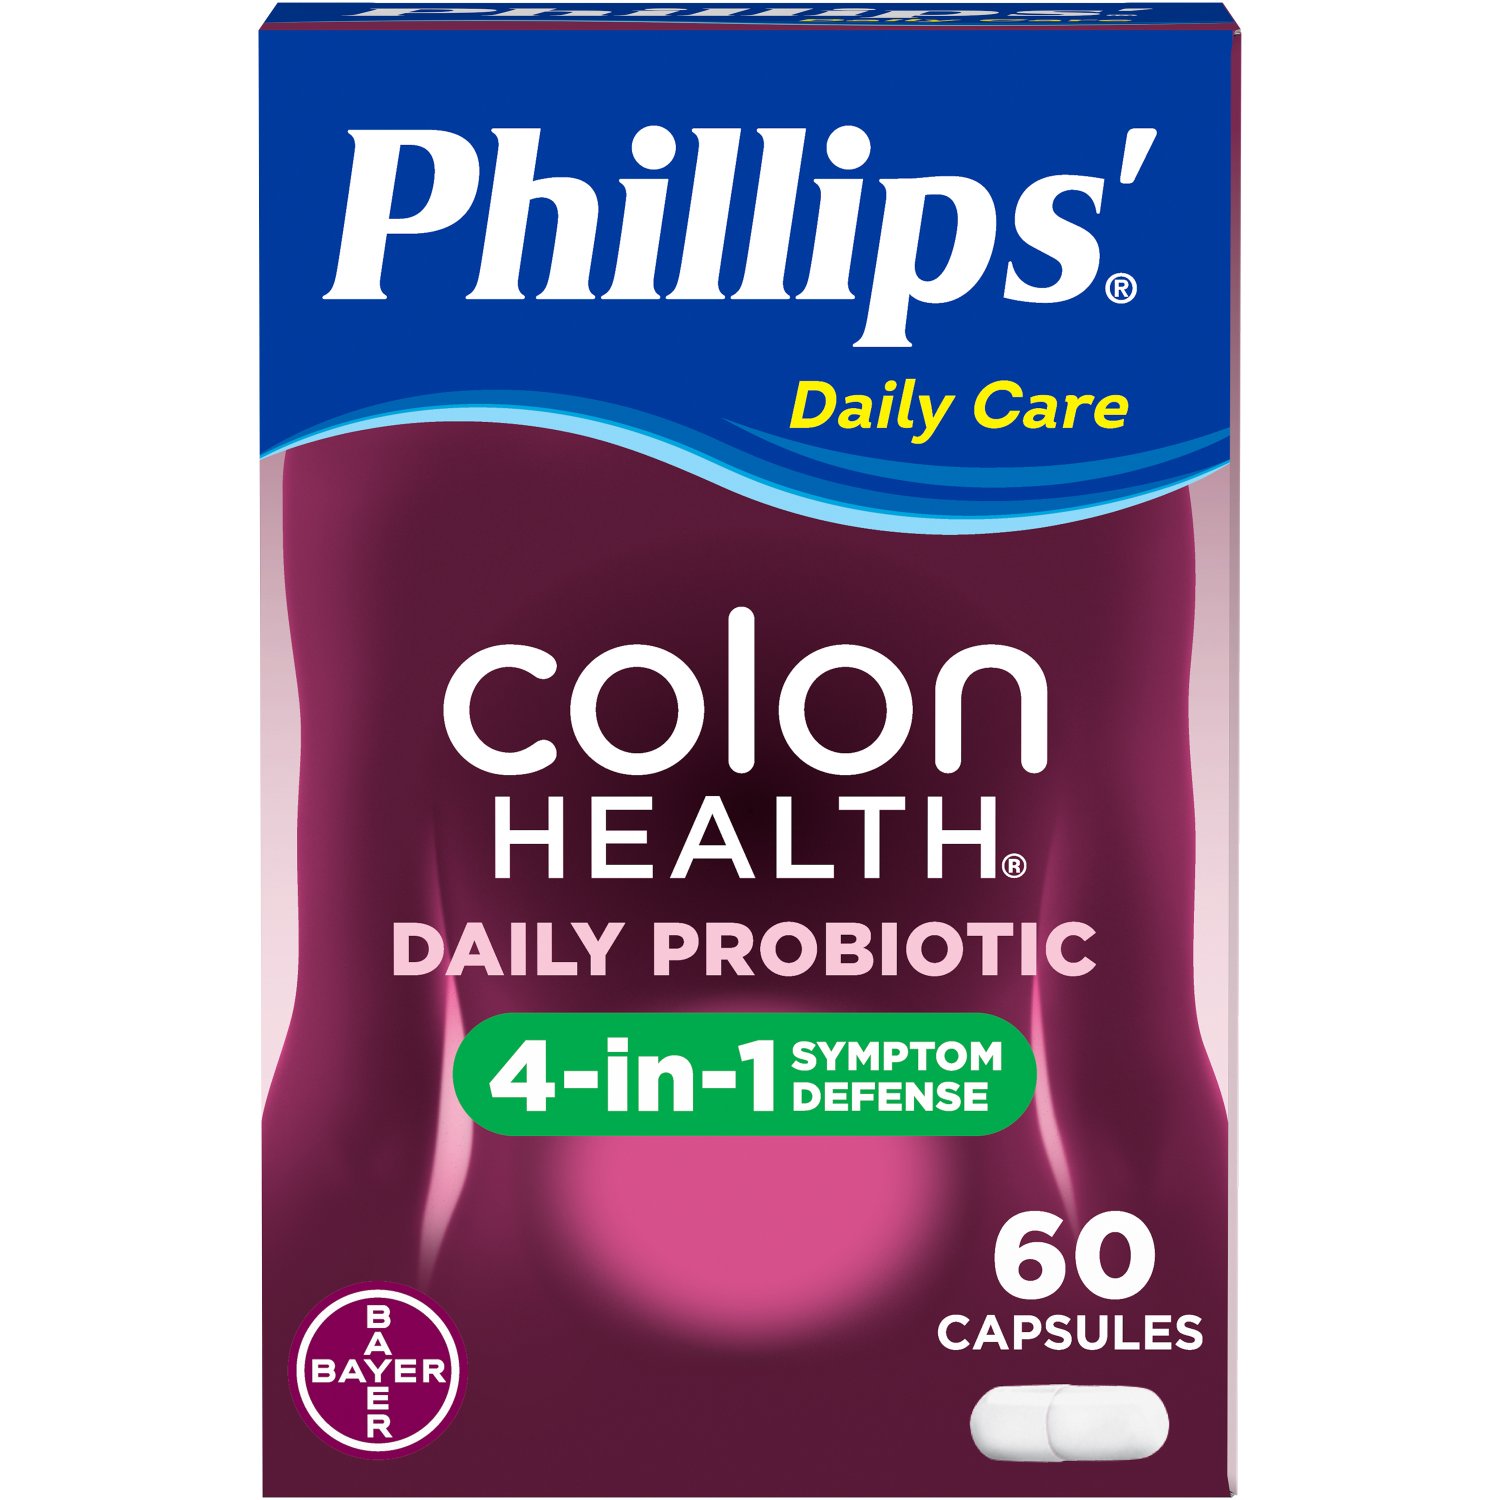 Phillips Colon Health Daily Probiotic Supplement Capsules, 60 Count